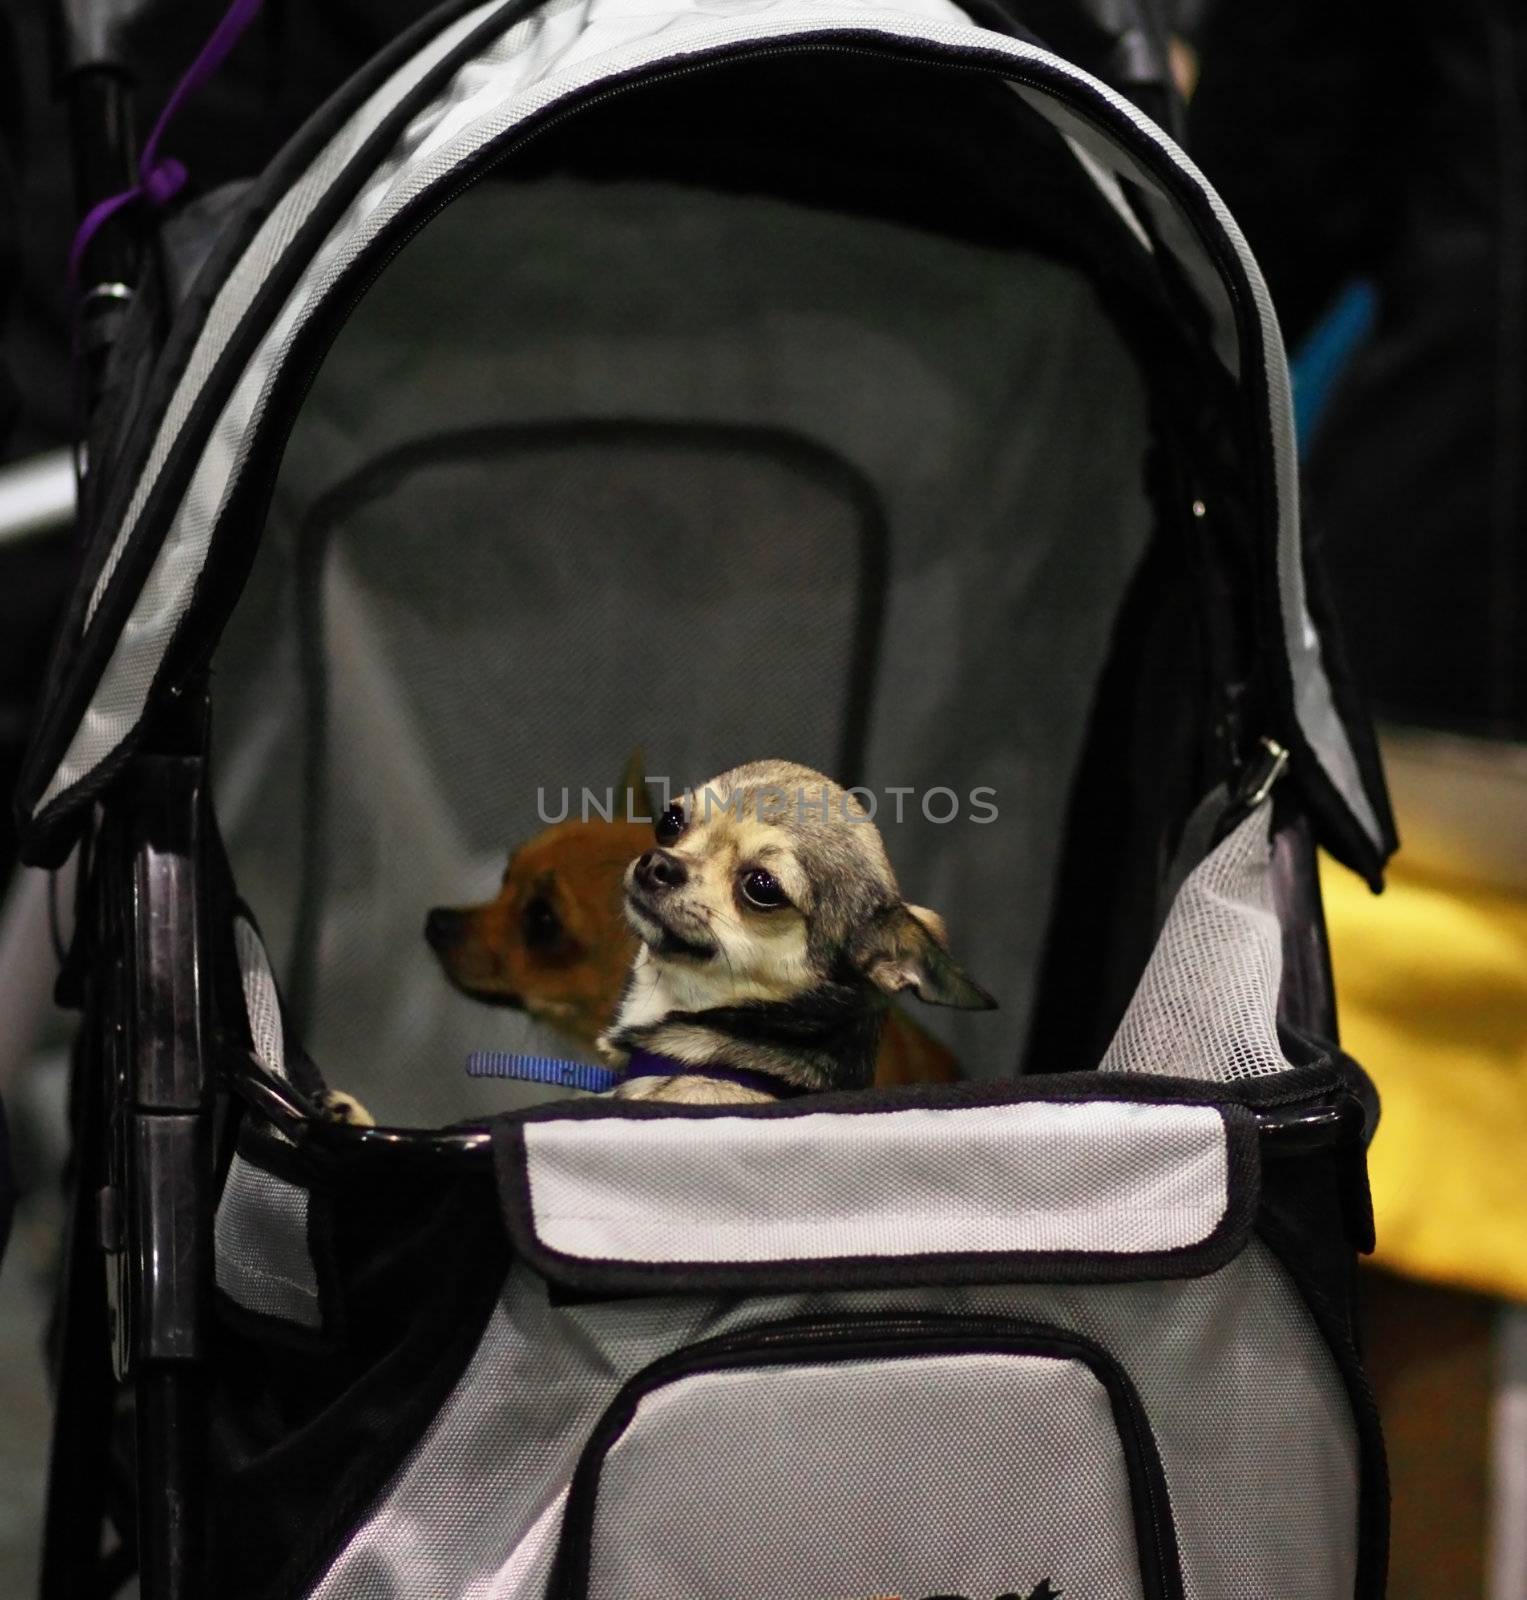 miniature dog in carriage by catolla